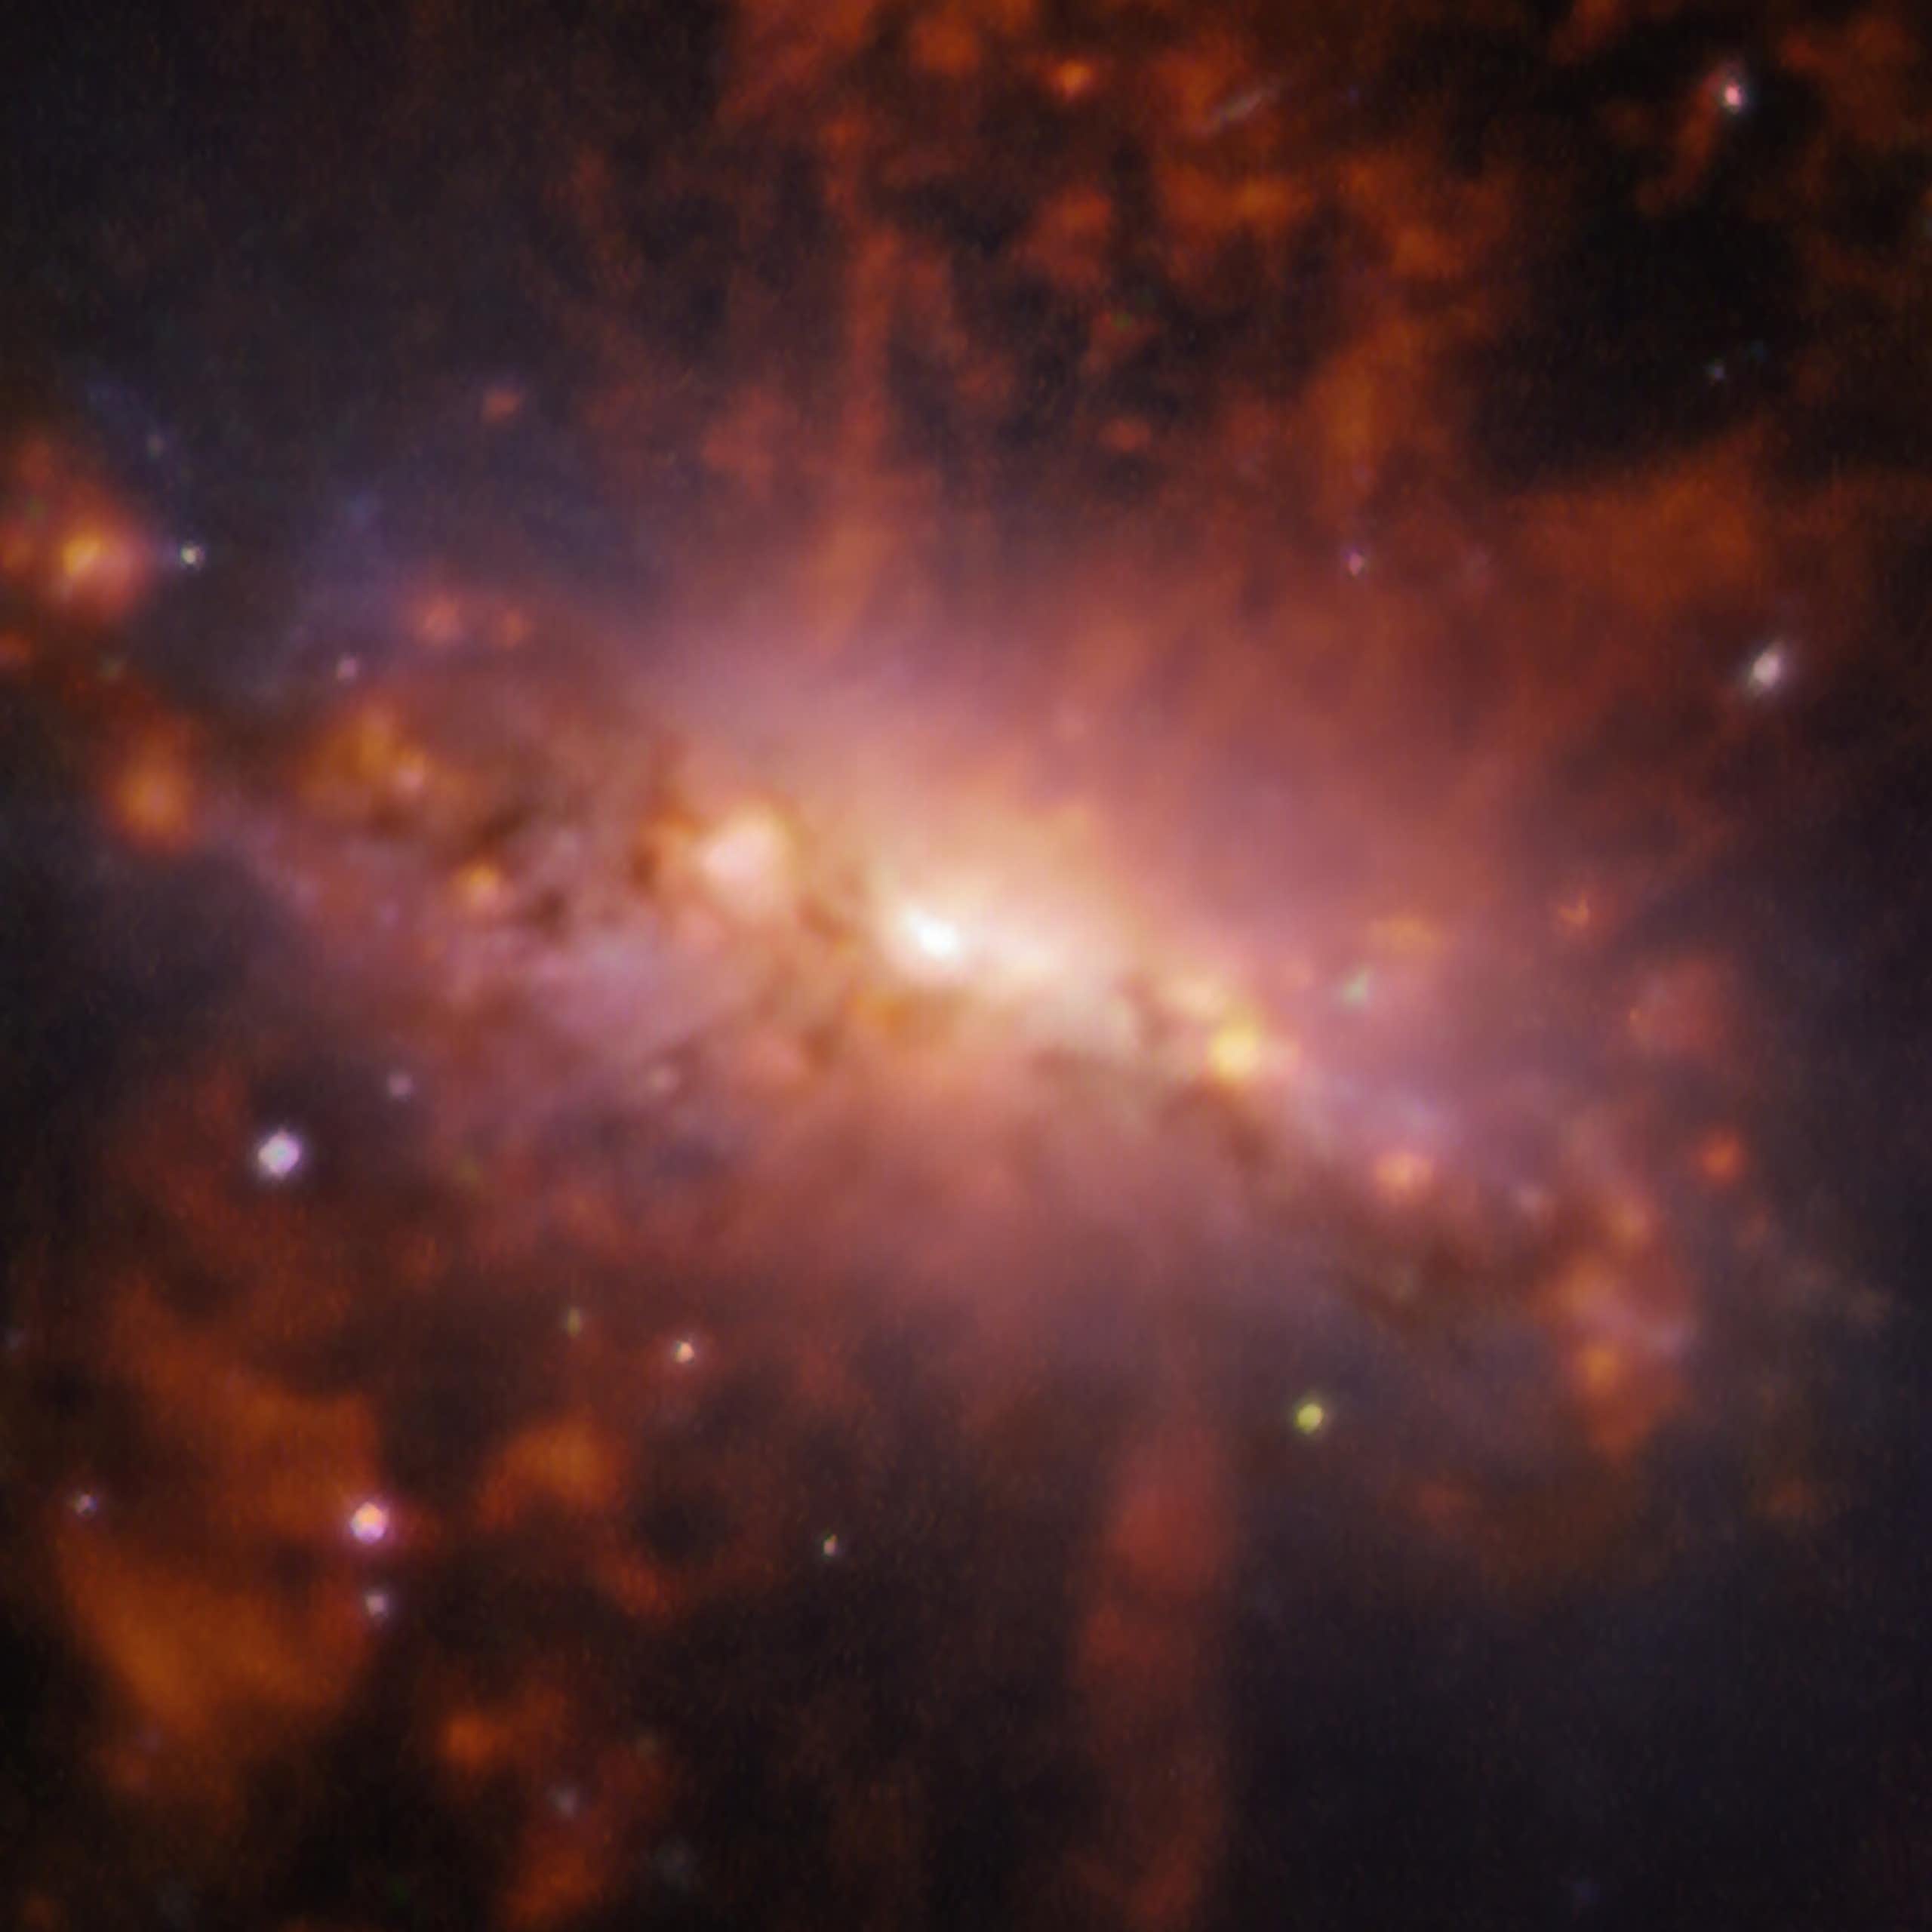 We mapped a massive explosion in space, showing how galaxies ‘pollute’ the cosmos